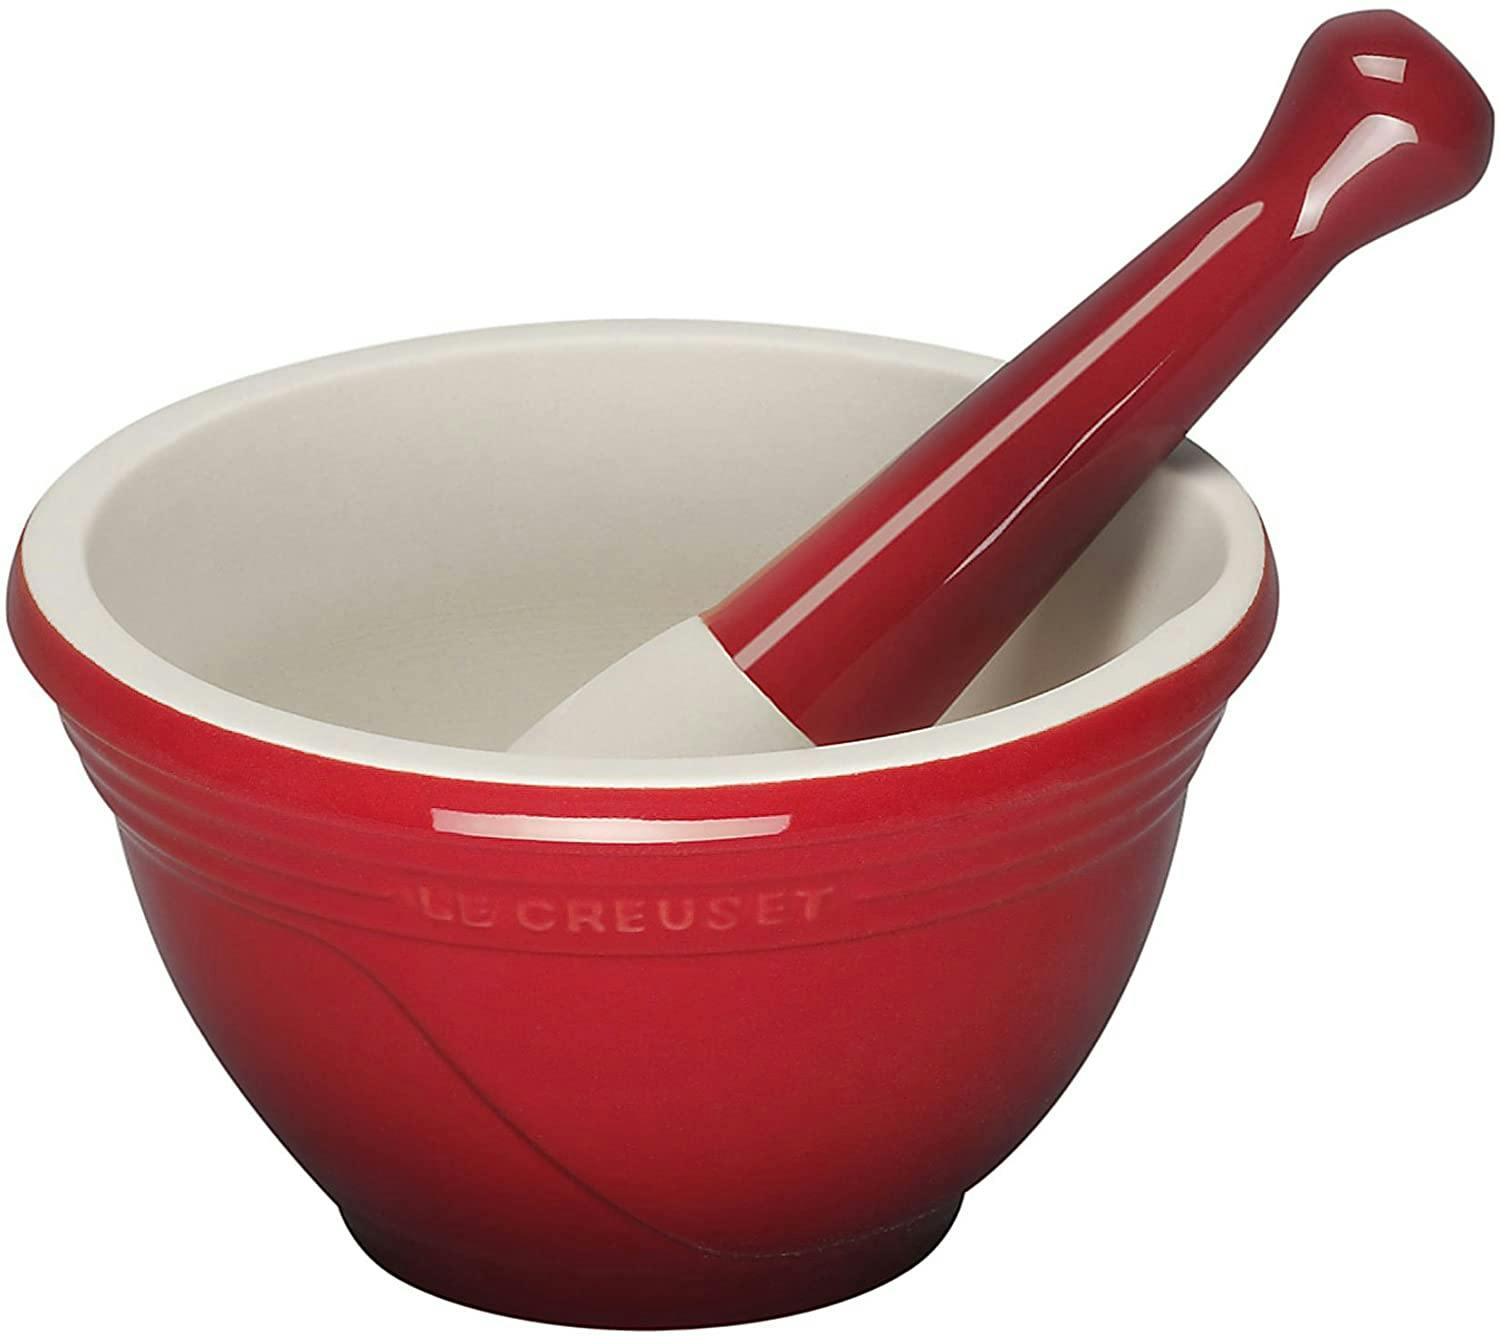 le creuset pestle and mortar